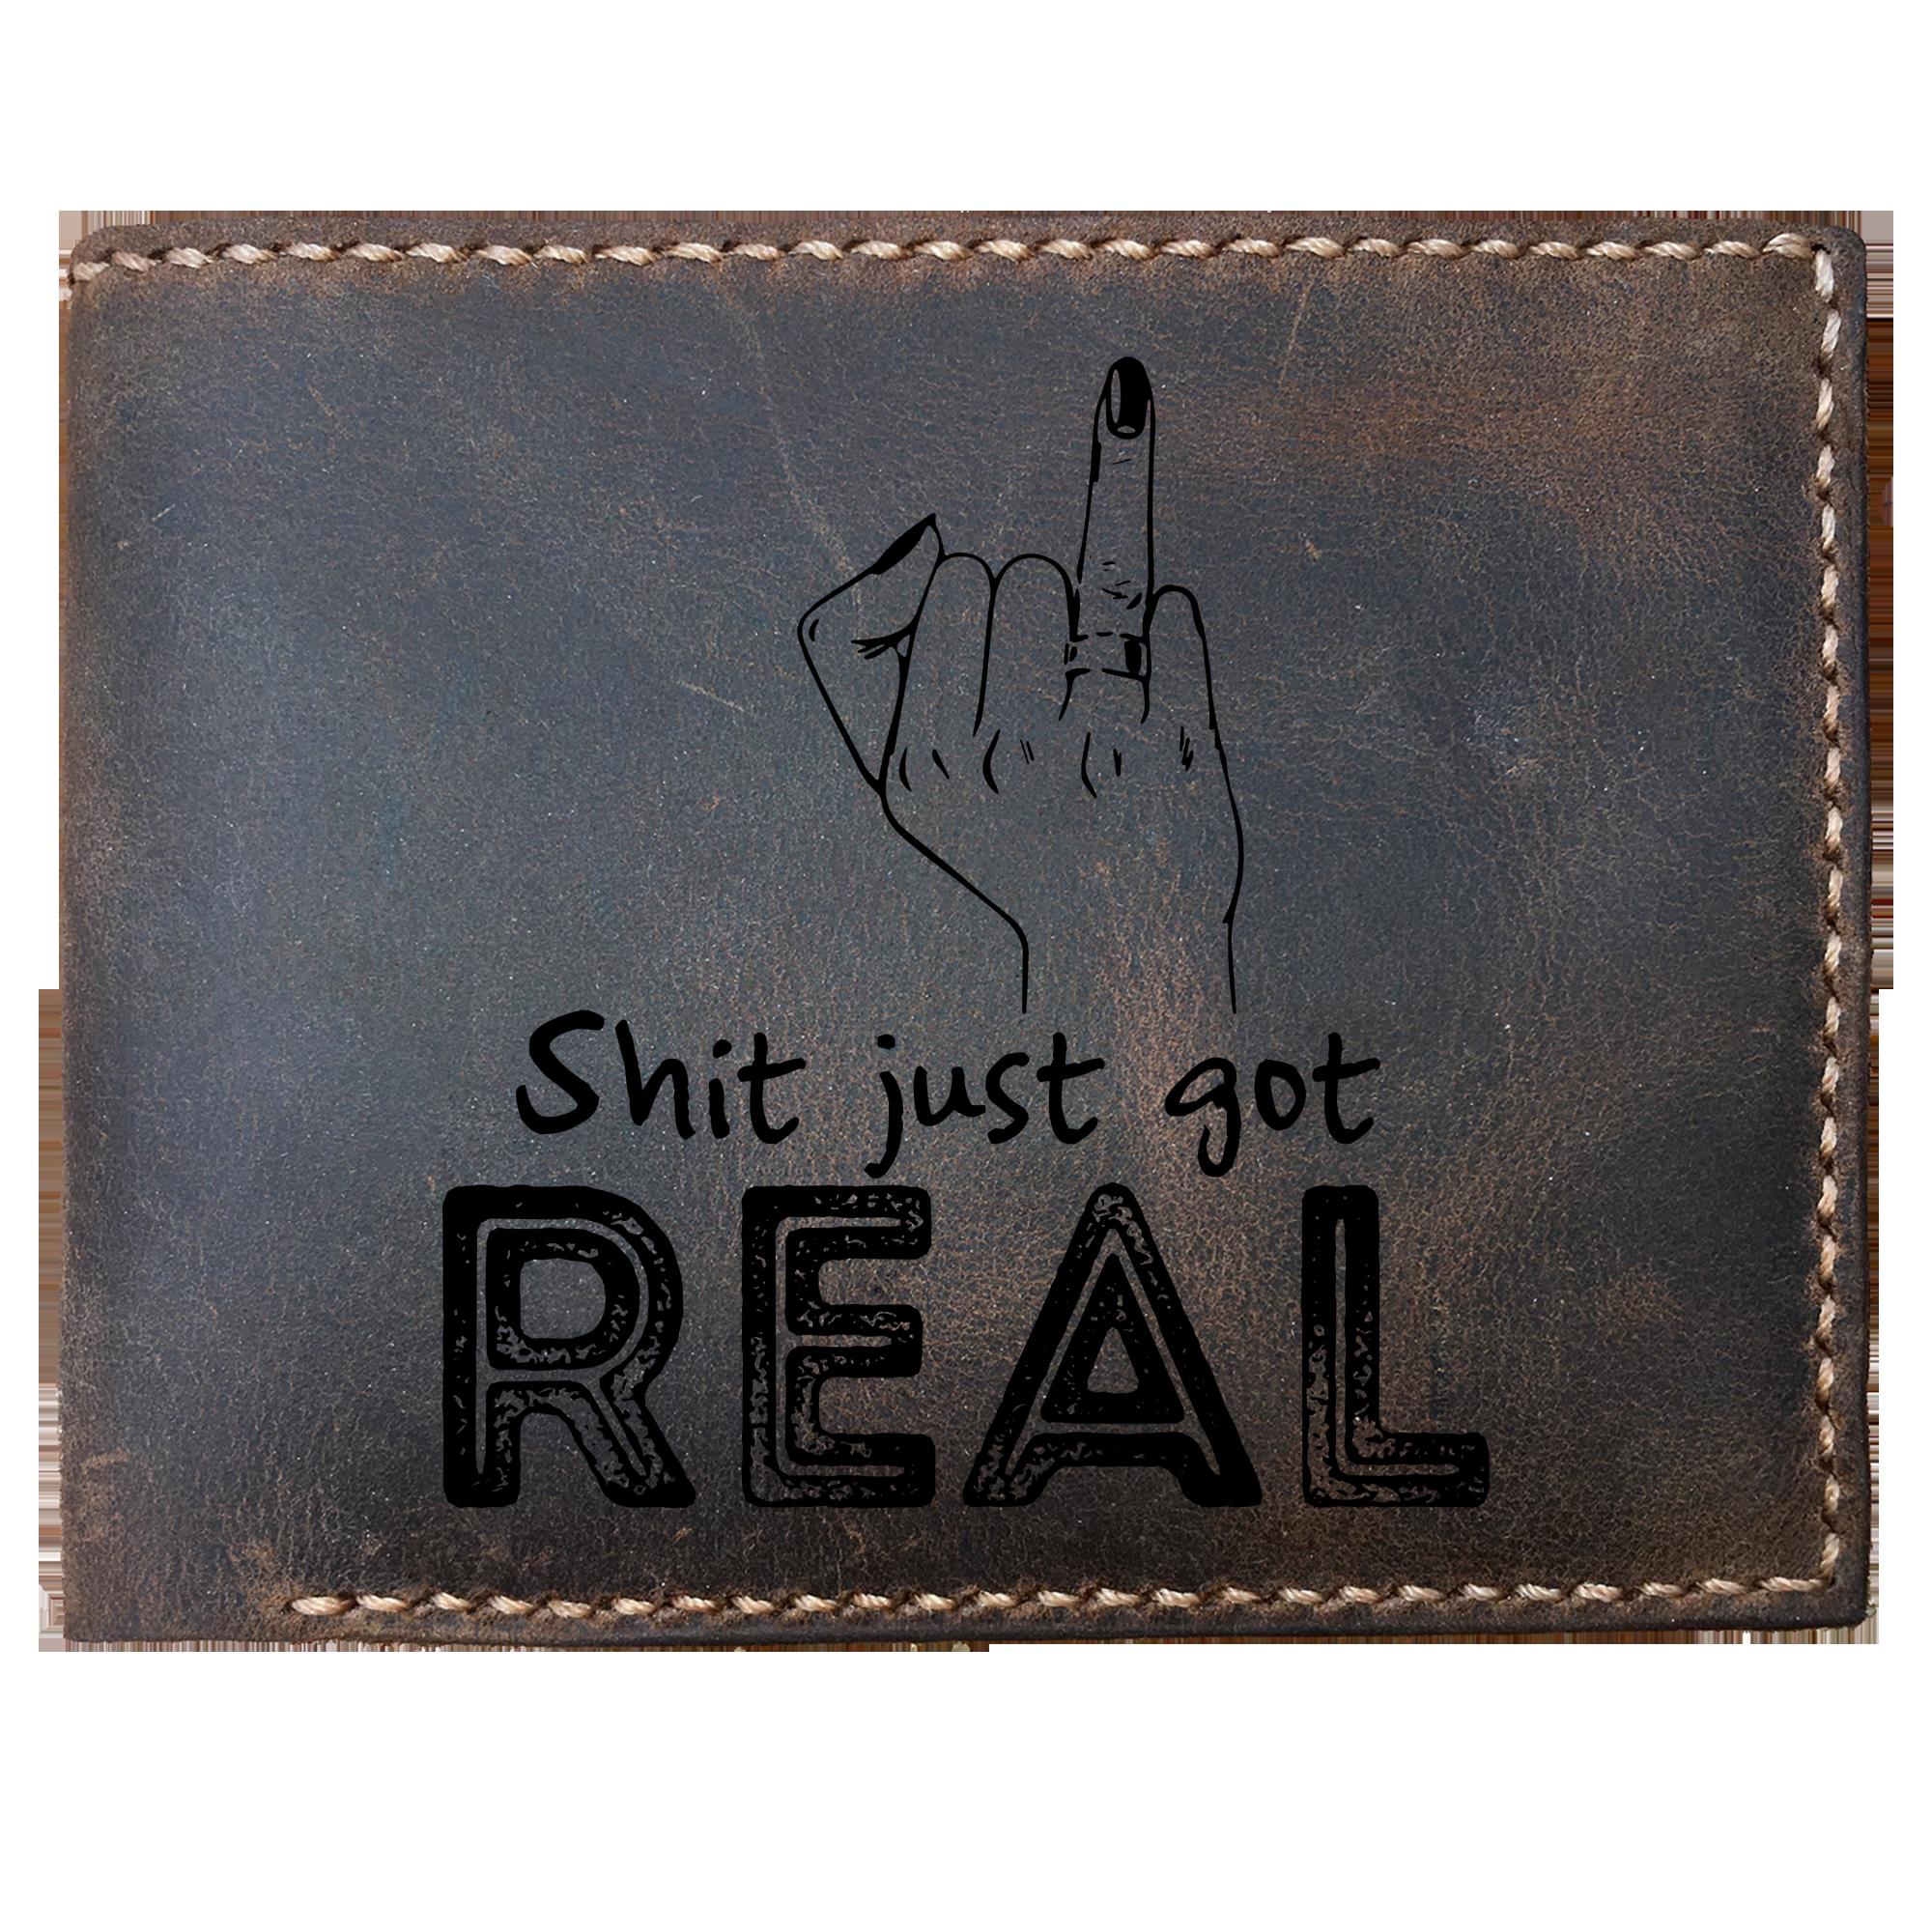 Skitongifts Funny Custom Laser Engraved Bifold Leather Wallet For Men, Shit Just Got Real Funny Engagement